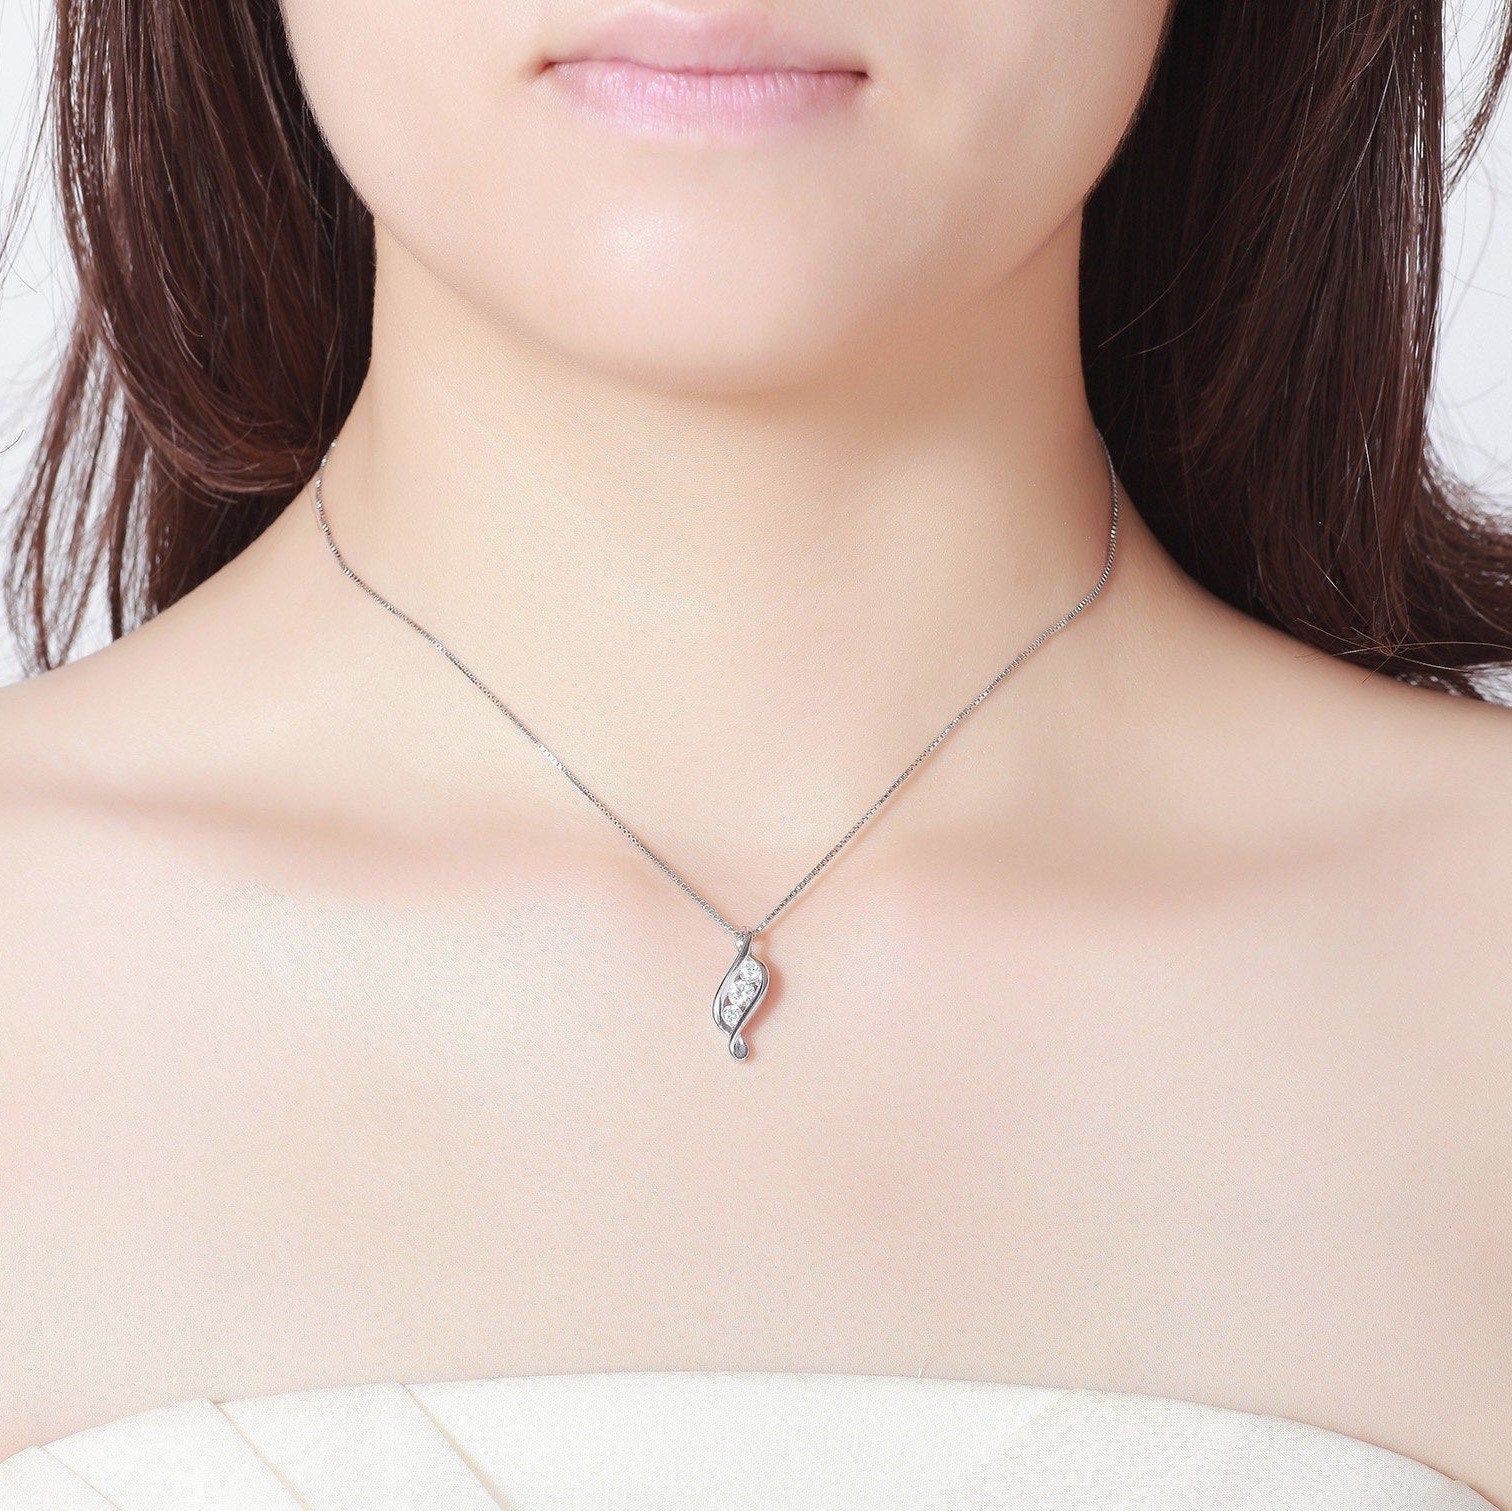 JOE - Delicate Three stone flame style Necklaces & box Chain, Christmas gift